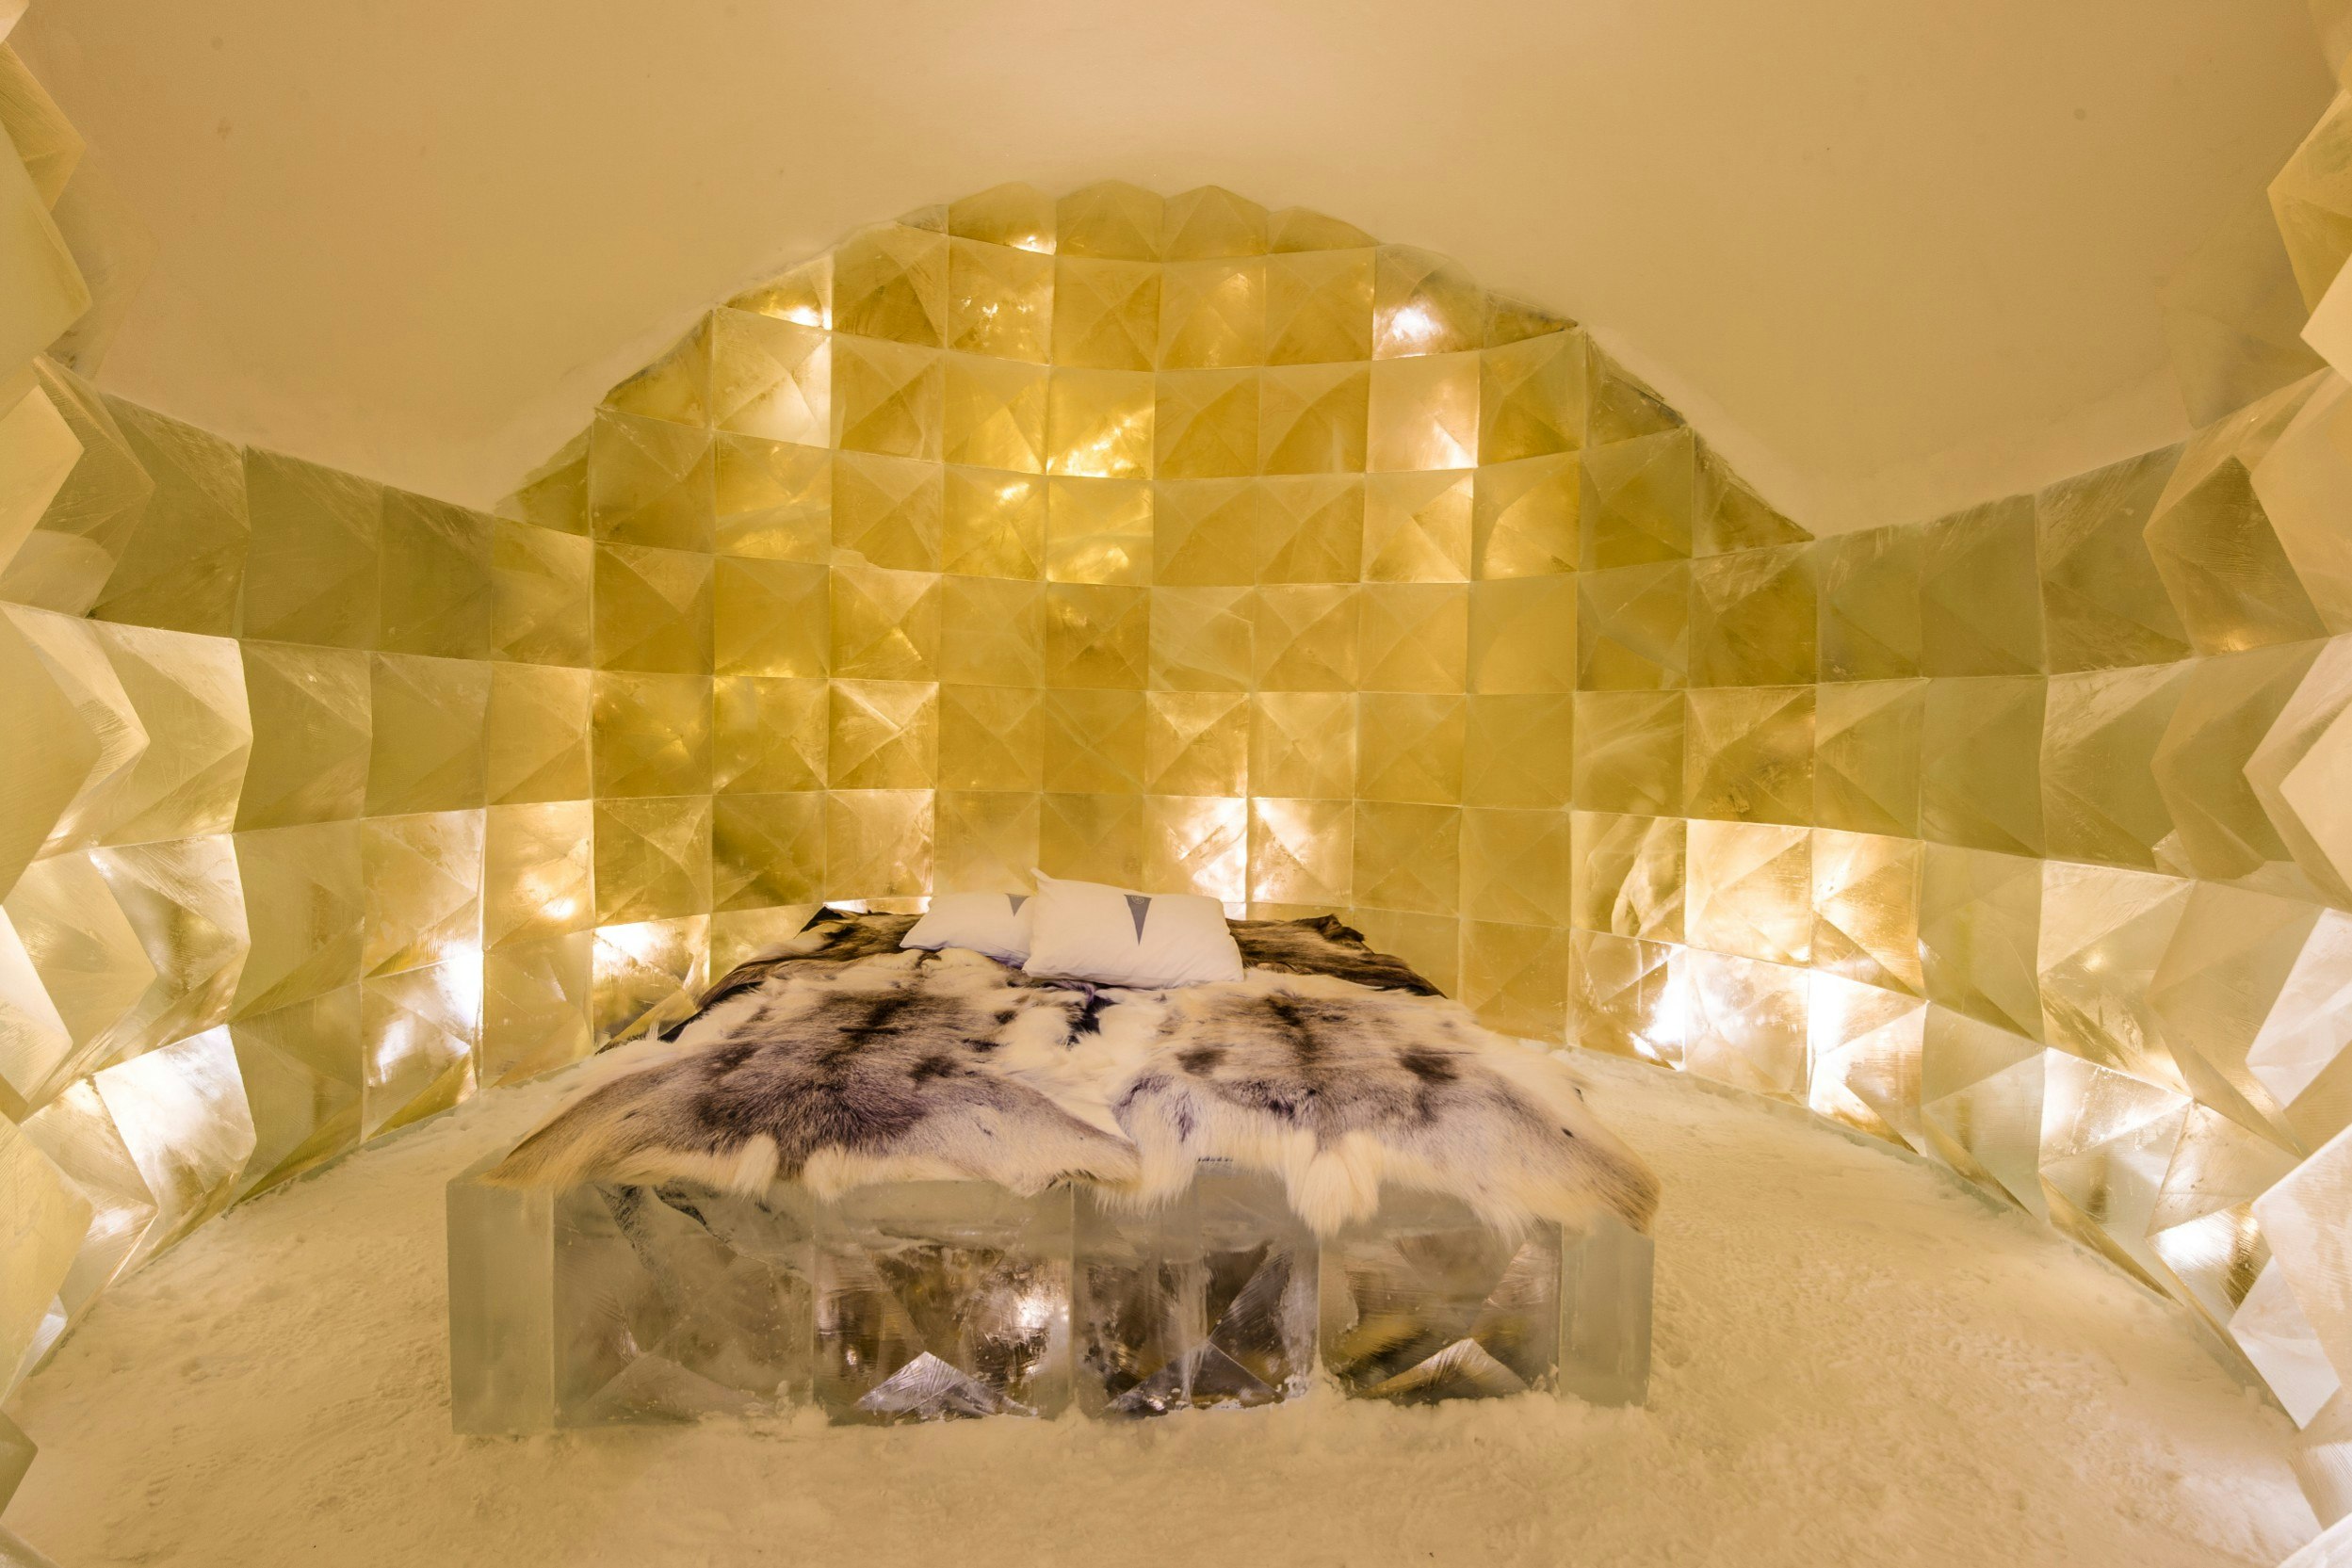 Golden Ice design at the Icehotel